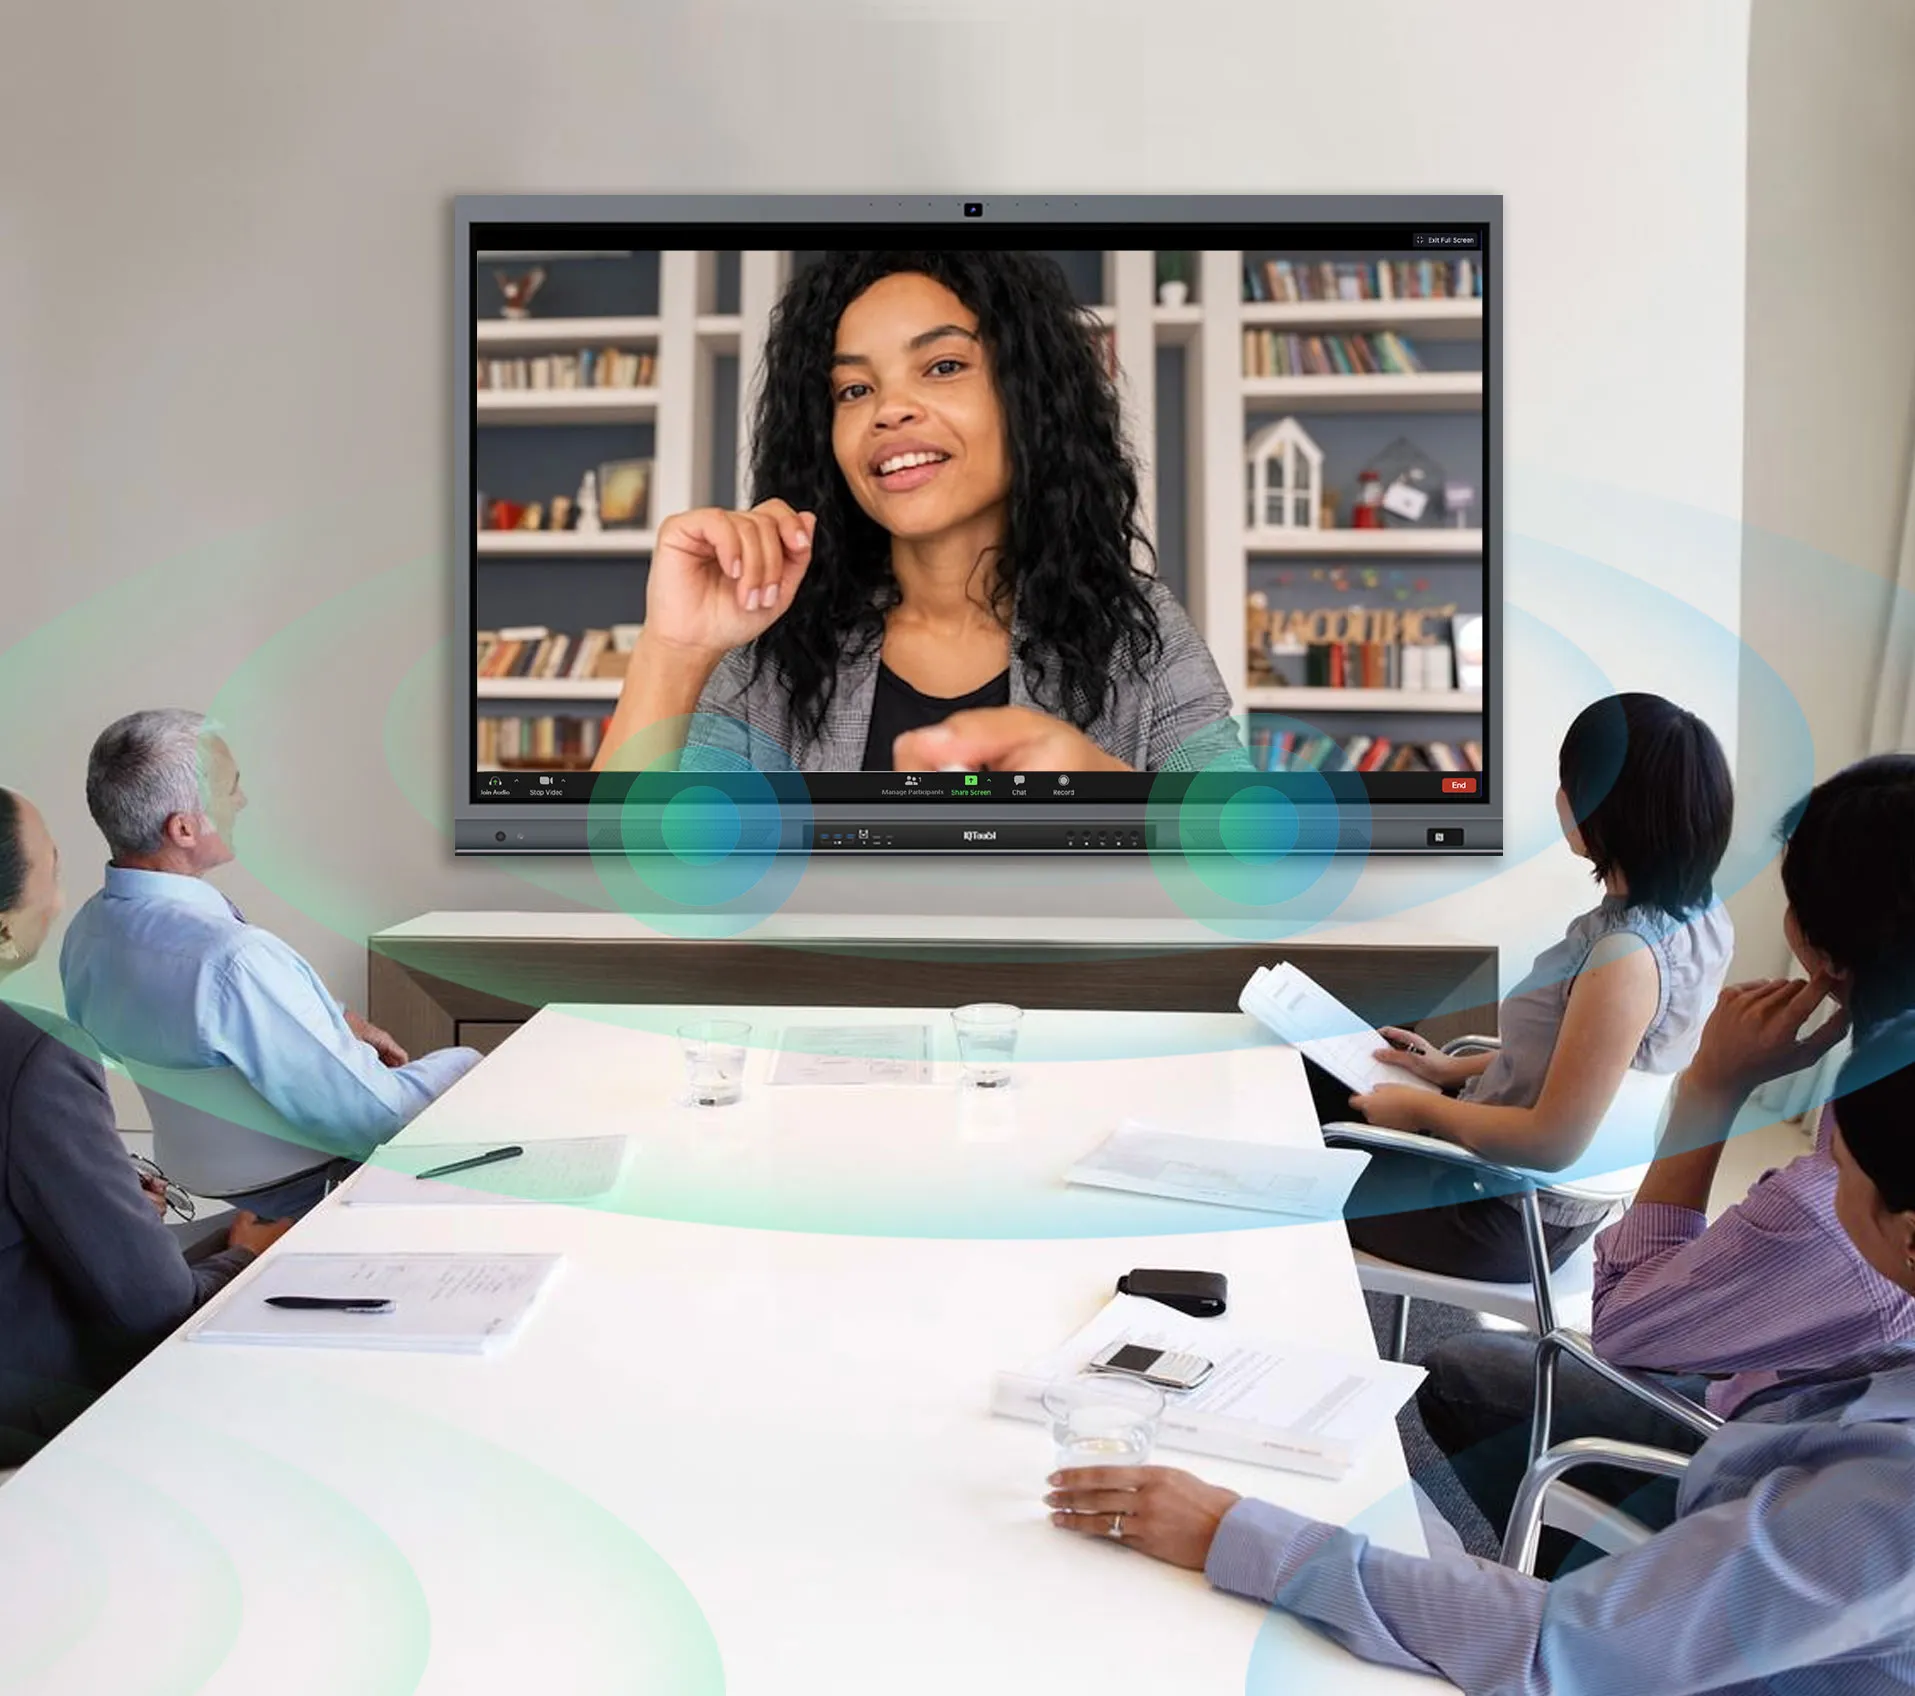 IQTouch QA1300 Pro equips powerful 20W speakers and a 20W subwoofer and 8 array microphones covering an 8-meter voice pickup range, ensuring voice to be covered during the video conferencing